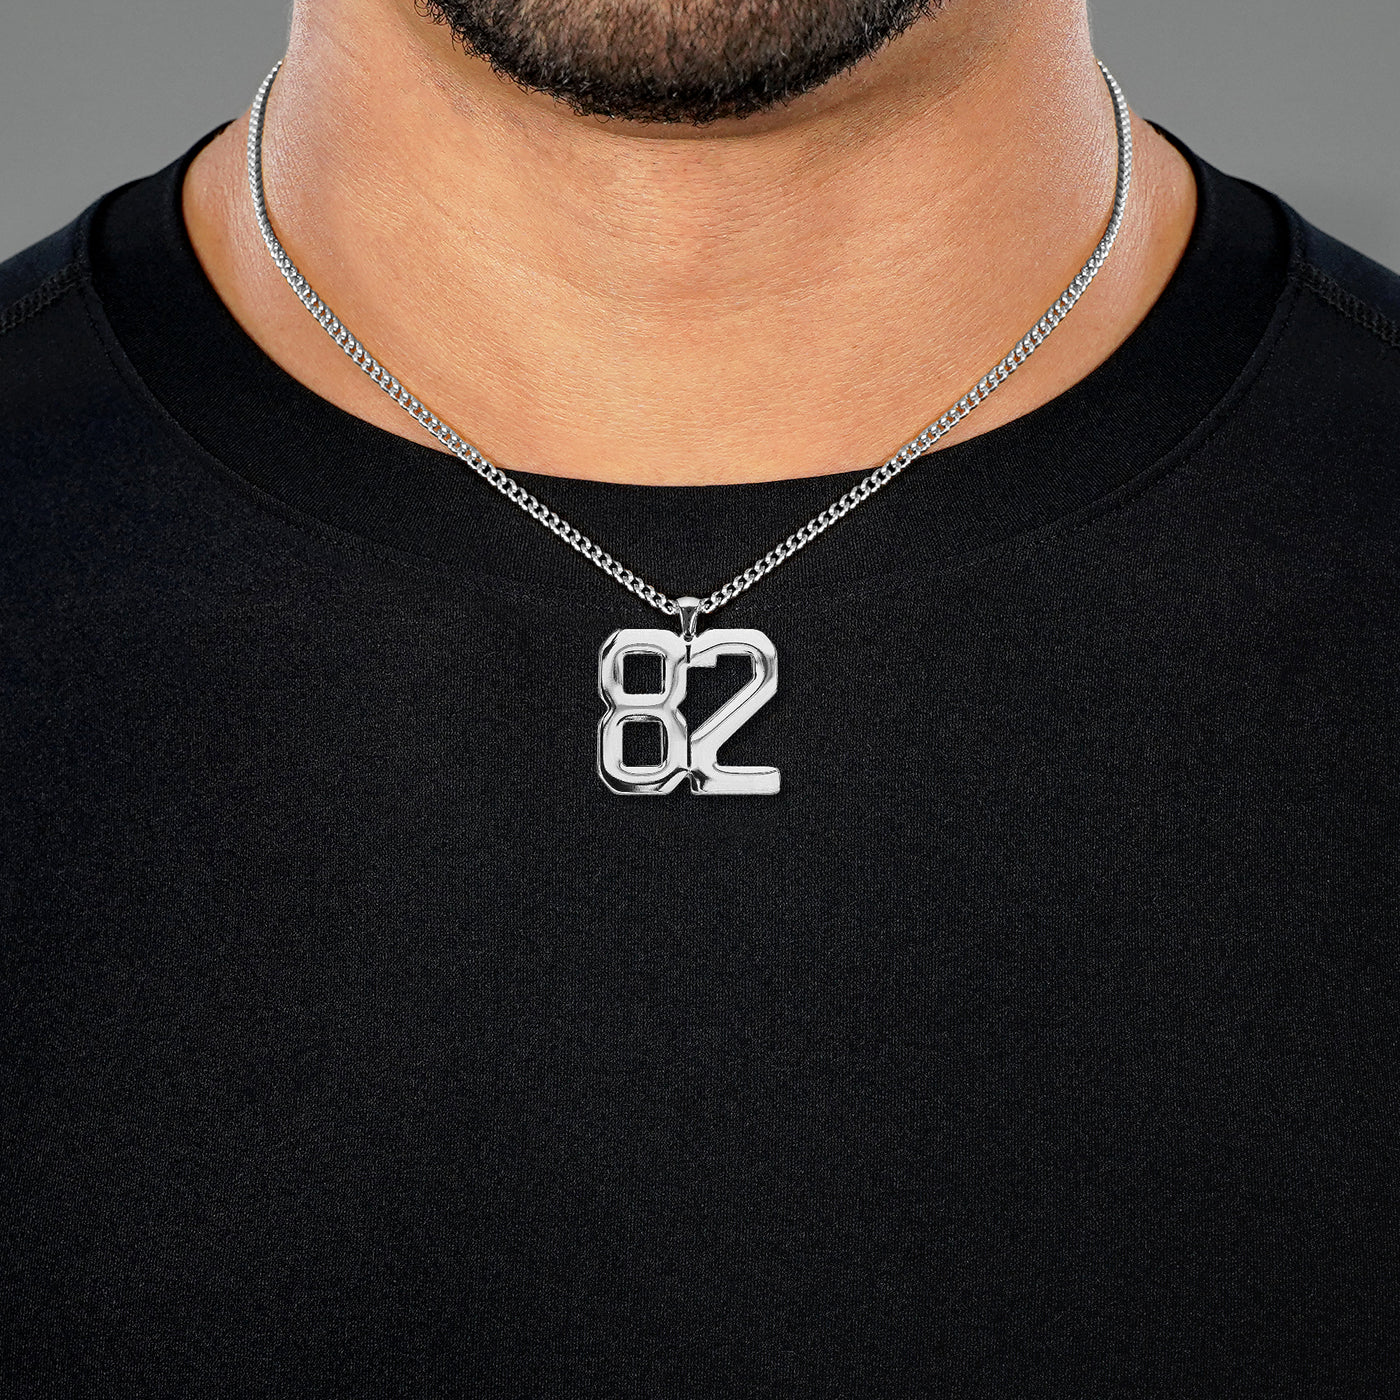 82 Number Pendant with Chain Necklace - Stainless Steel